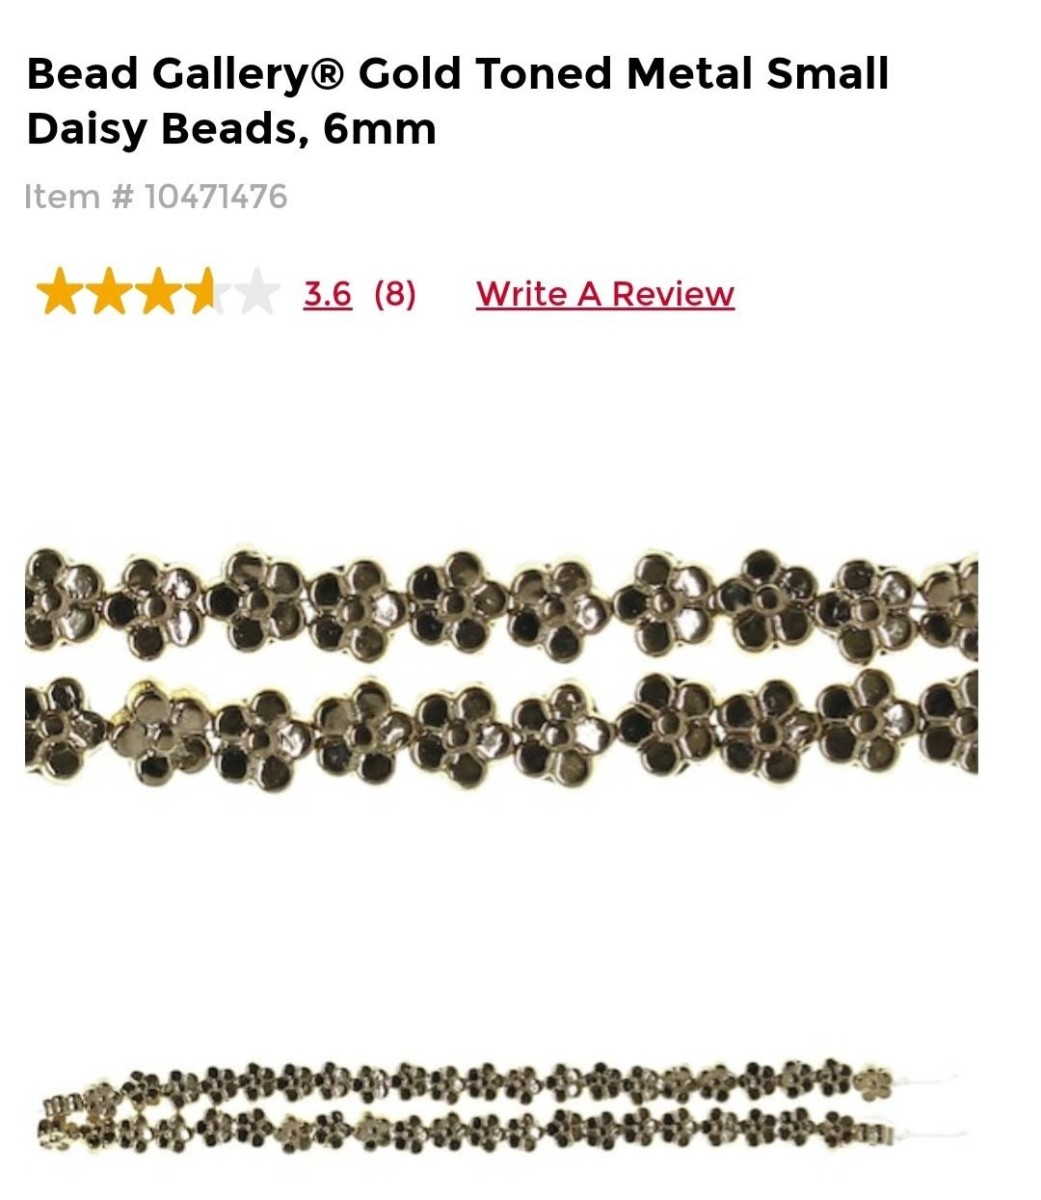 Bead Gallery Gold Toned Metal Small Daisy  Beads 6mm